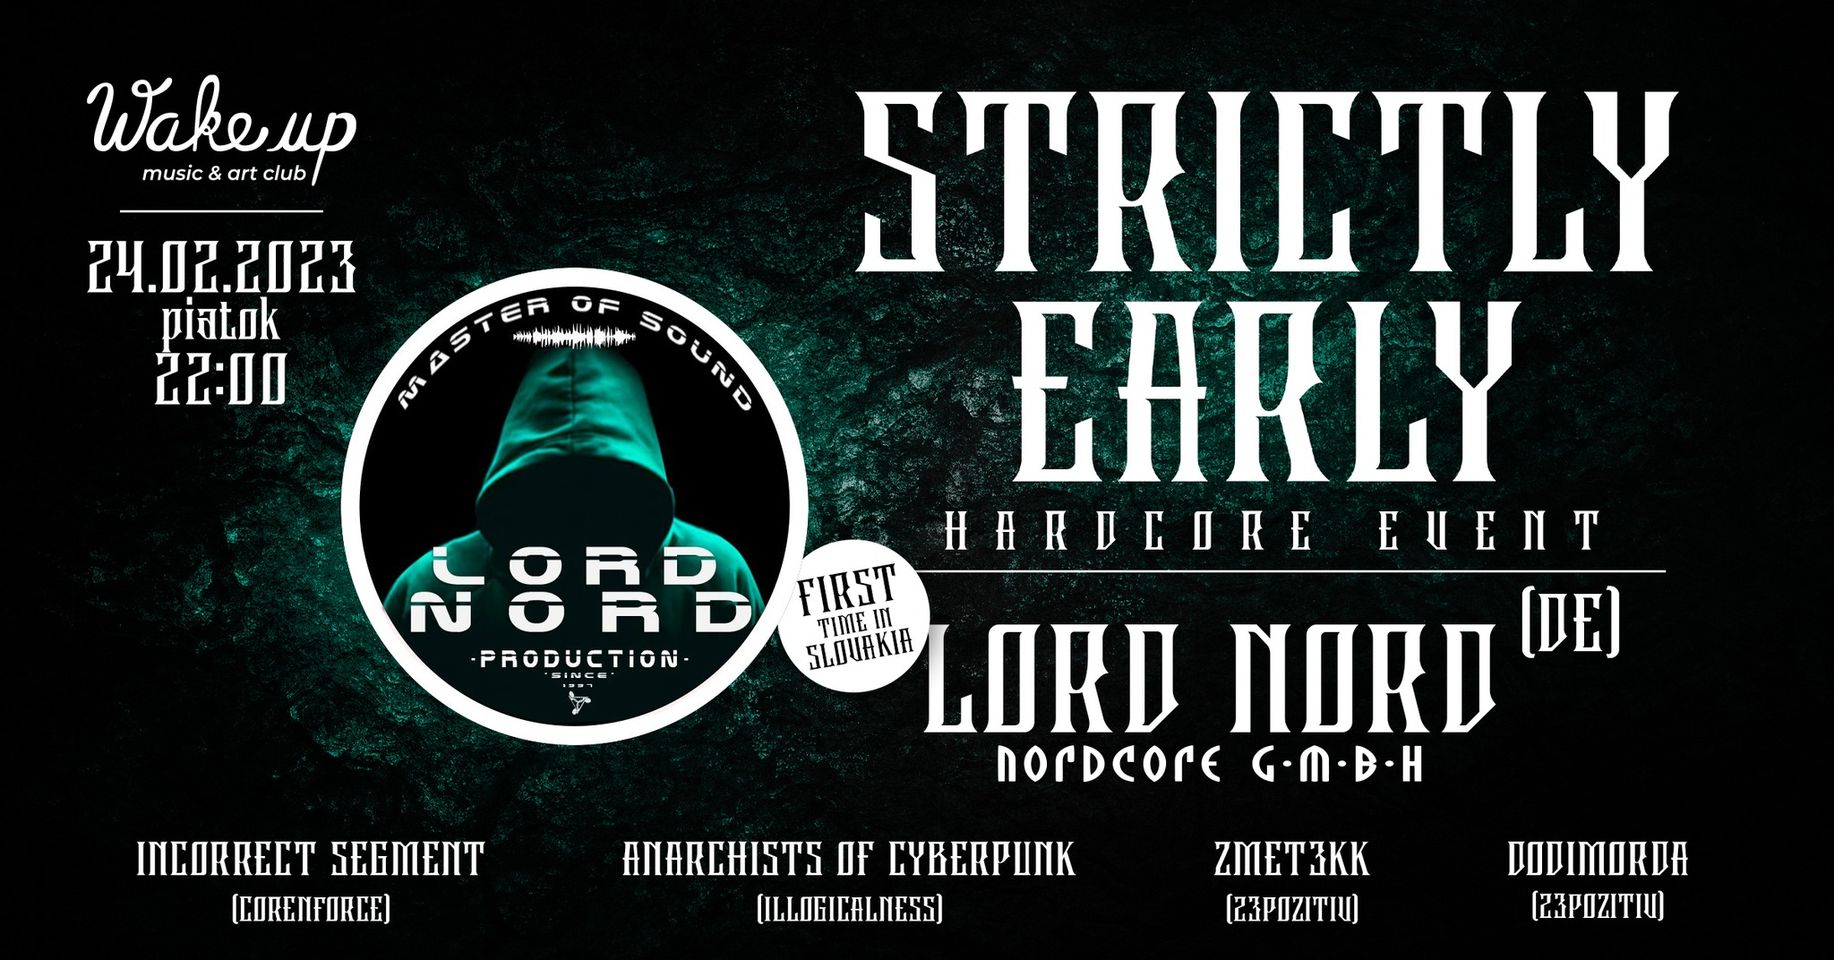 Strictly Early | Lord Nord (Nordcore G.M.B.H.) Wake up